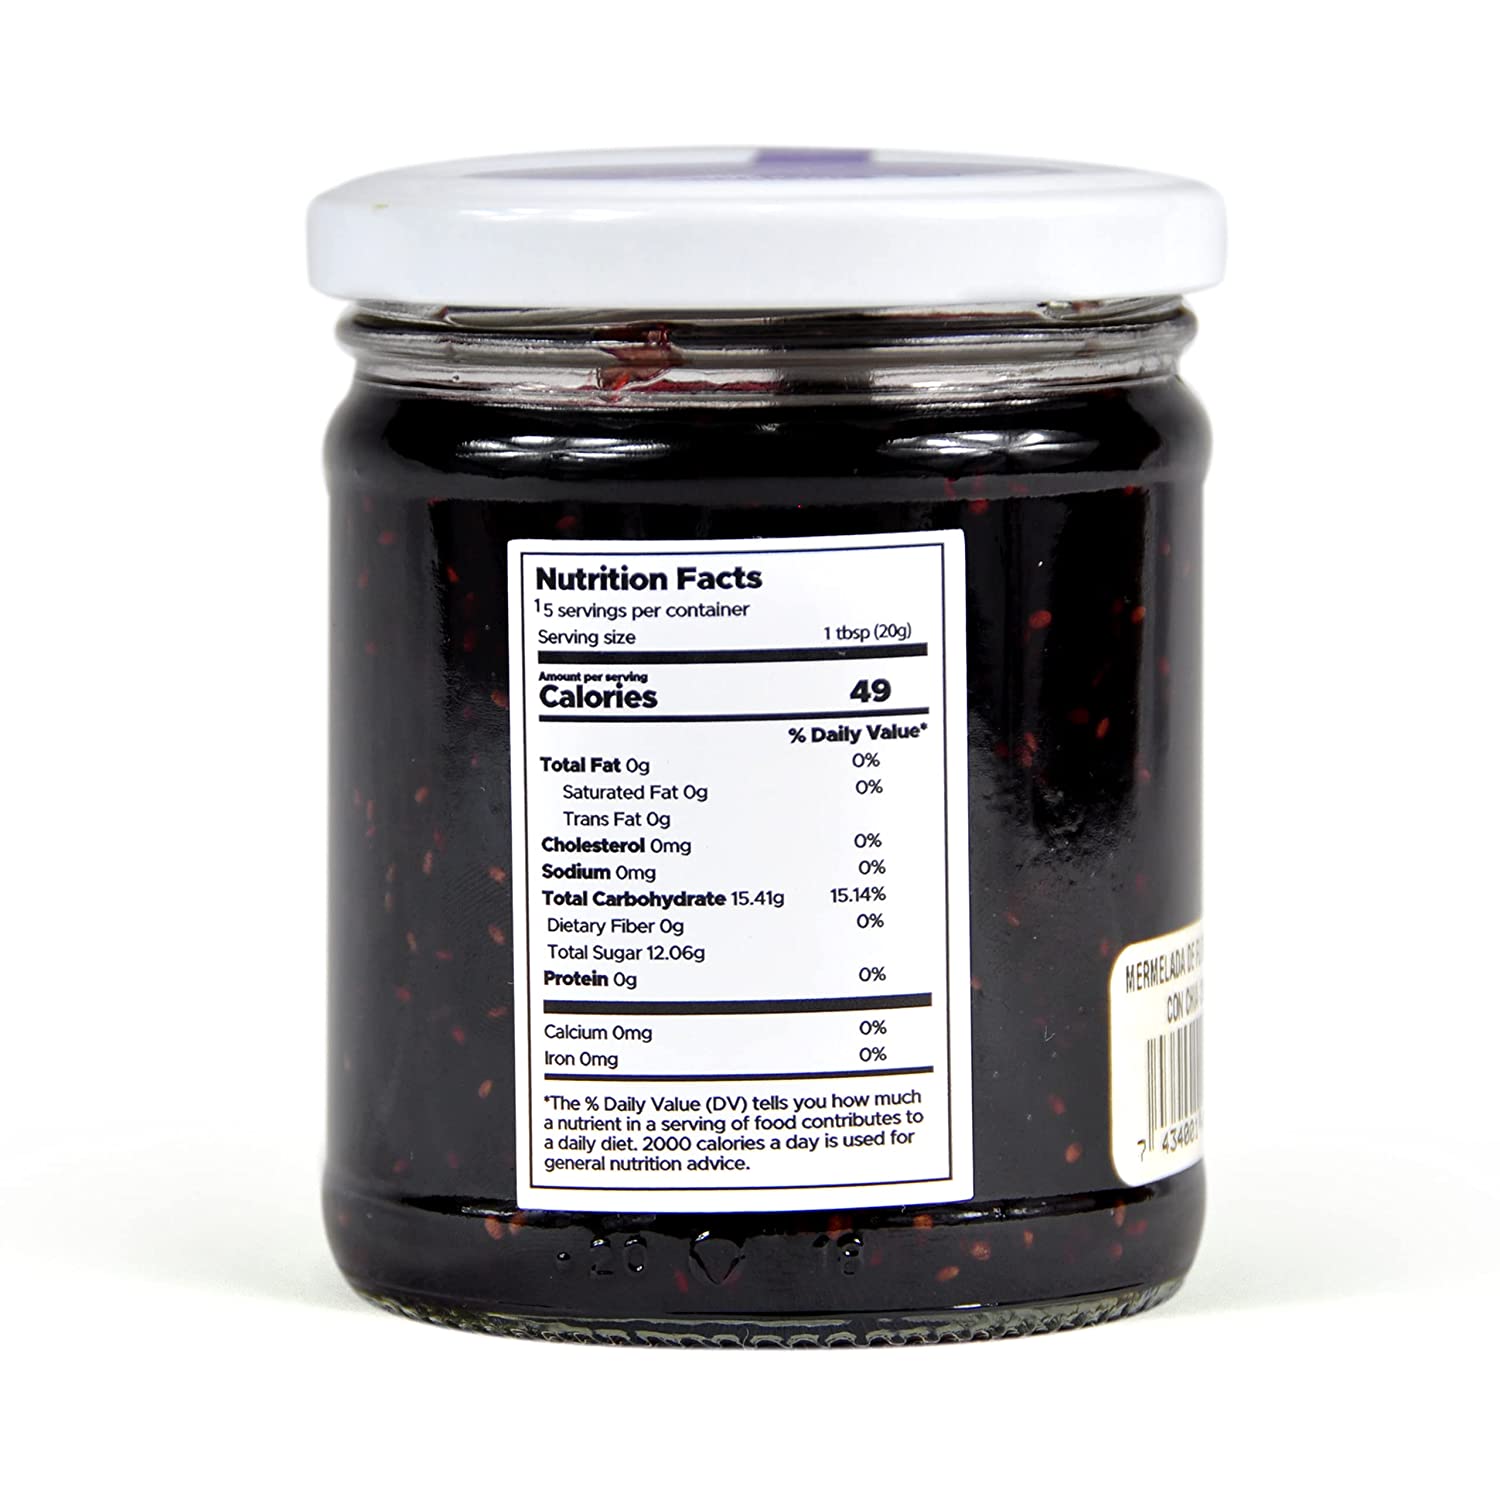 Ecovida, Hibiscus Flower Jam, Tropical Hibiscus Flower Jelly with Chia seeds, Organic Jam. Nicaraguan product. 10.5 ONZ / 300 grms